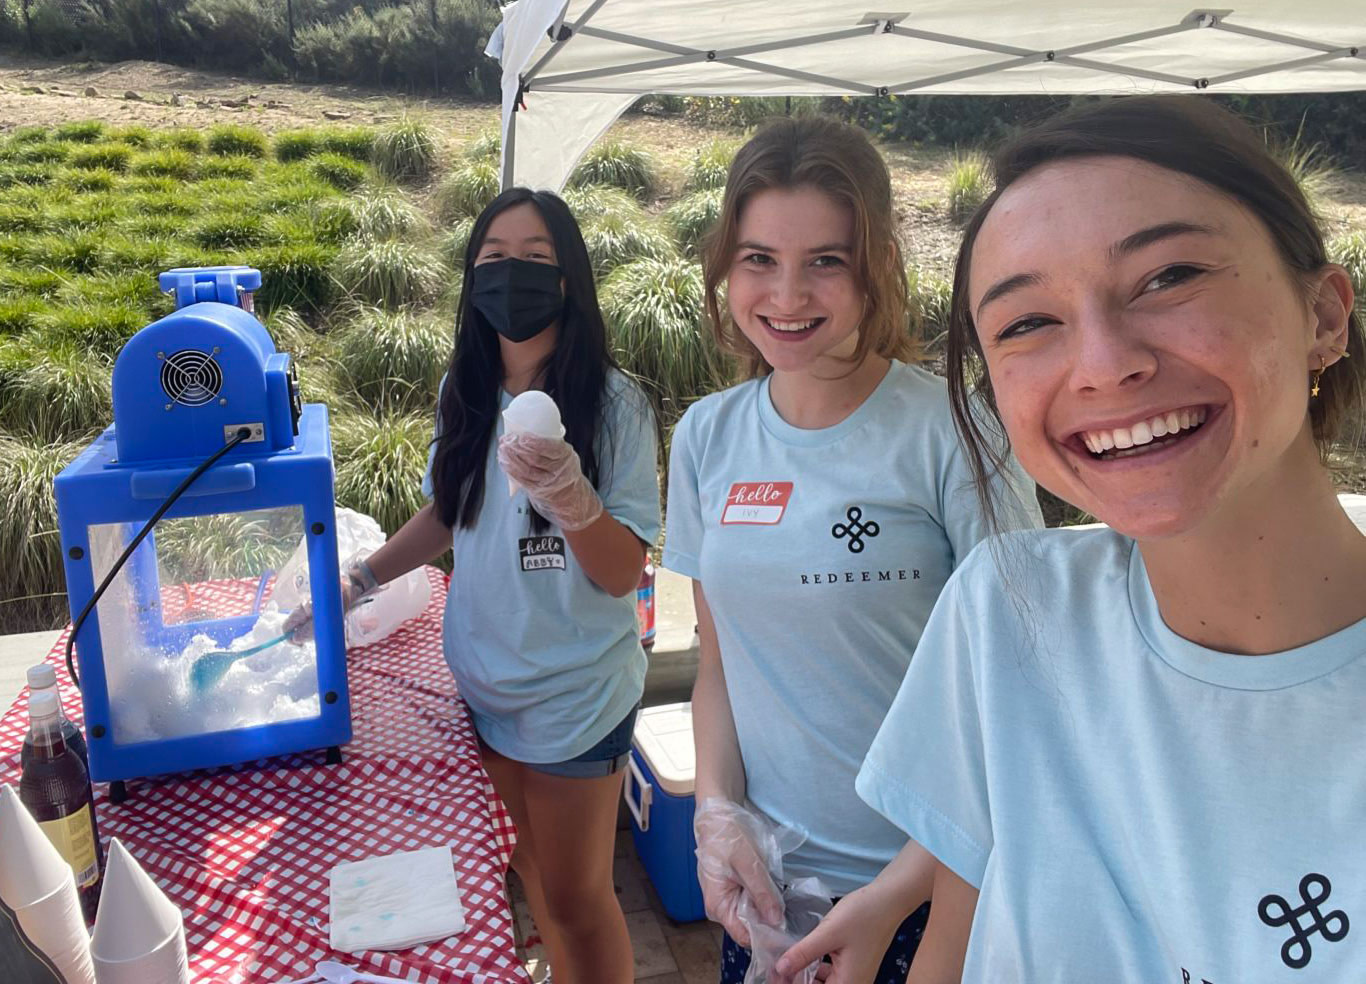 Smiling teens serving at a snow cone booth